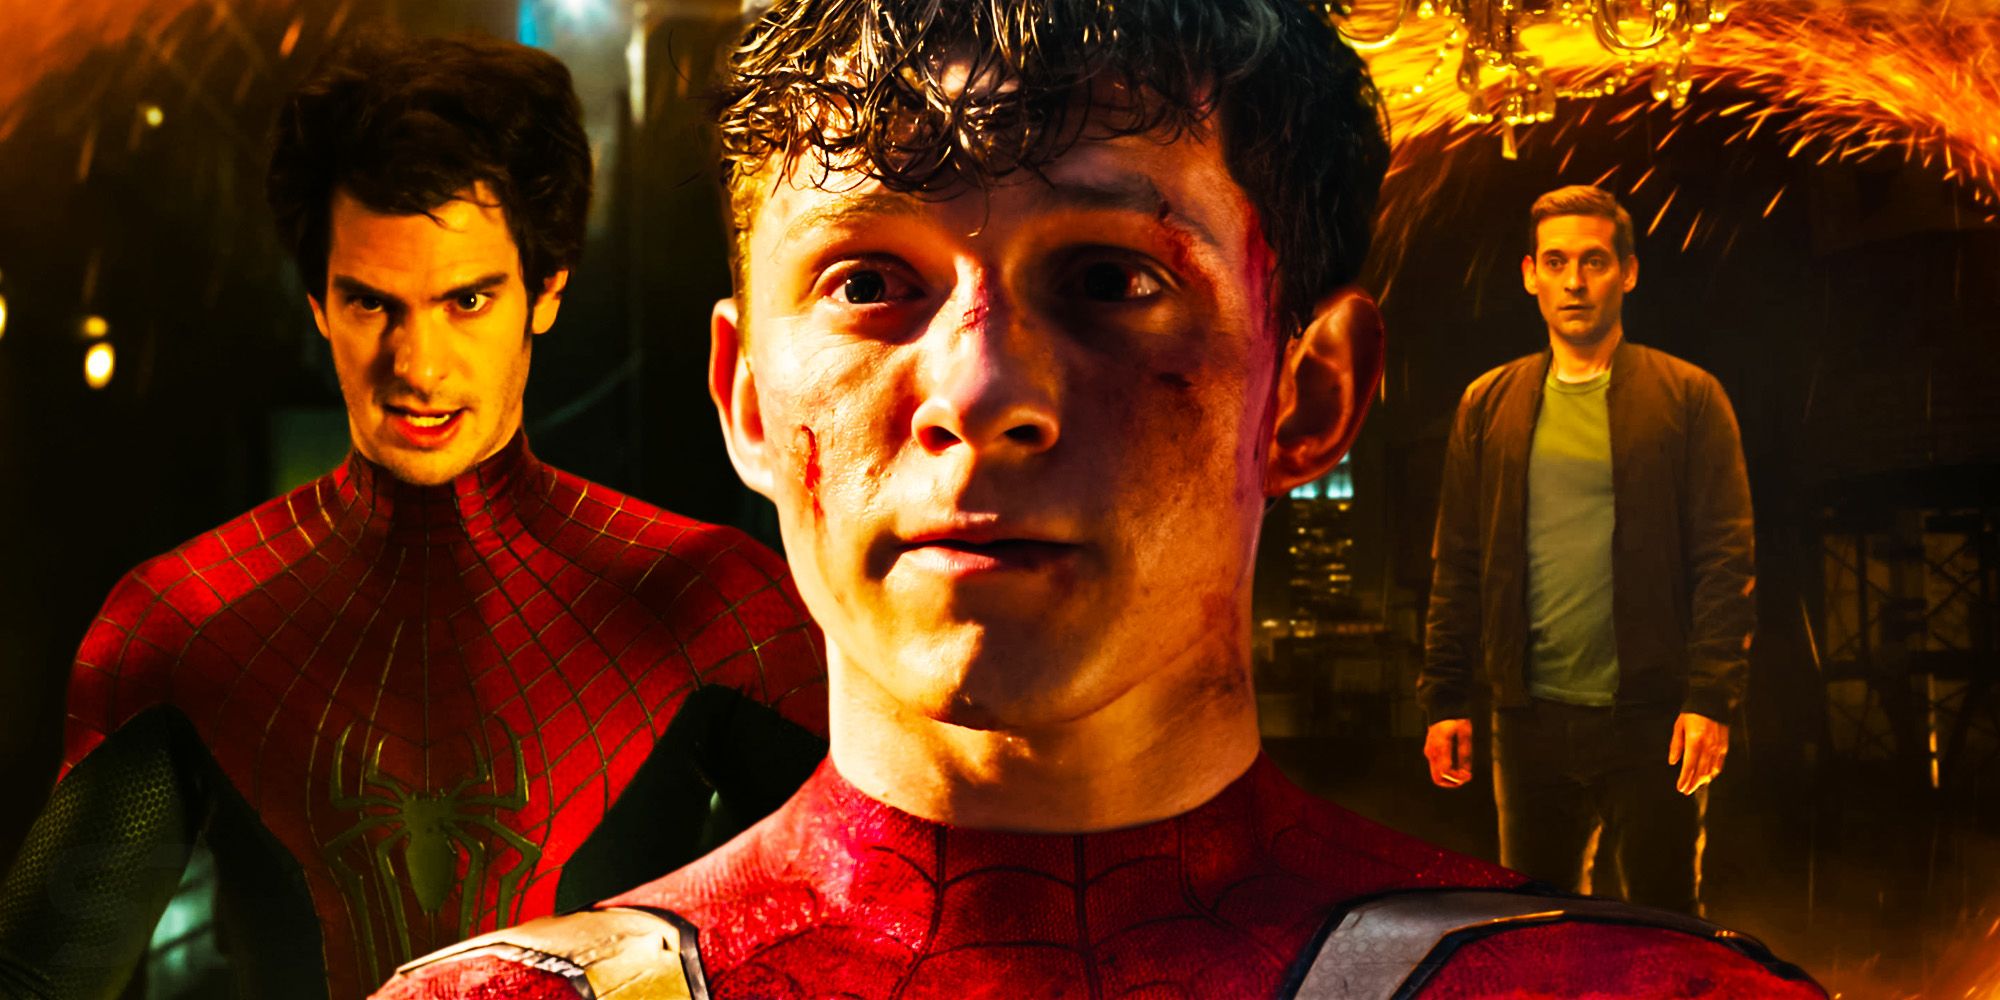 Spider-Man 4 or Amazing Spider-Man 3 Is Too Big a Risk for Sony